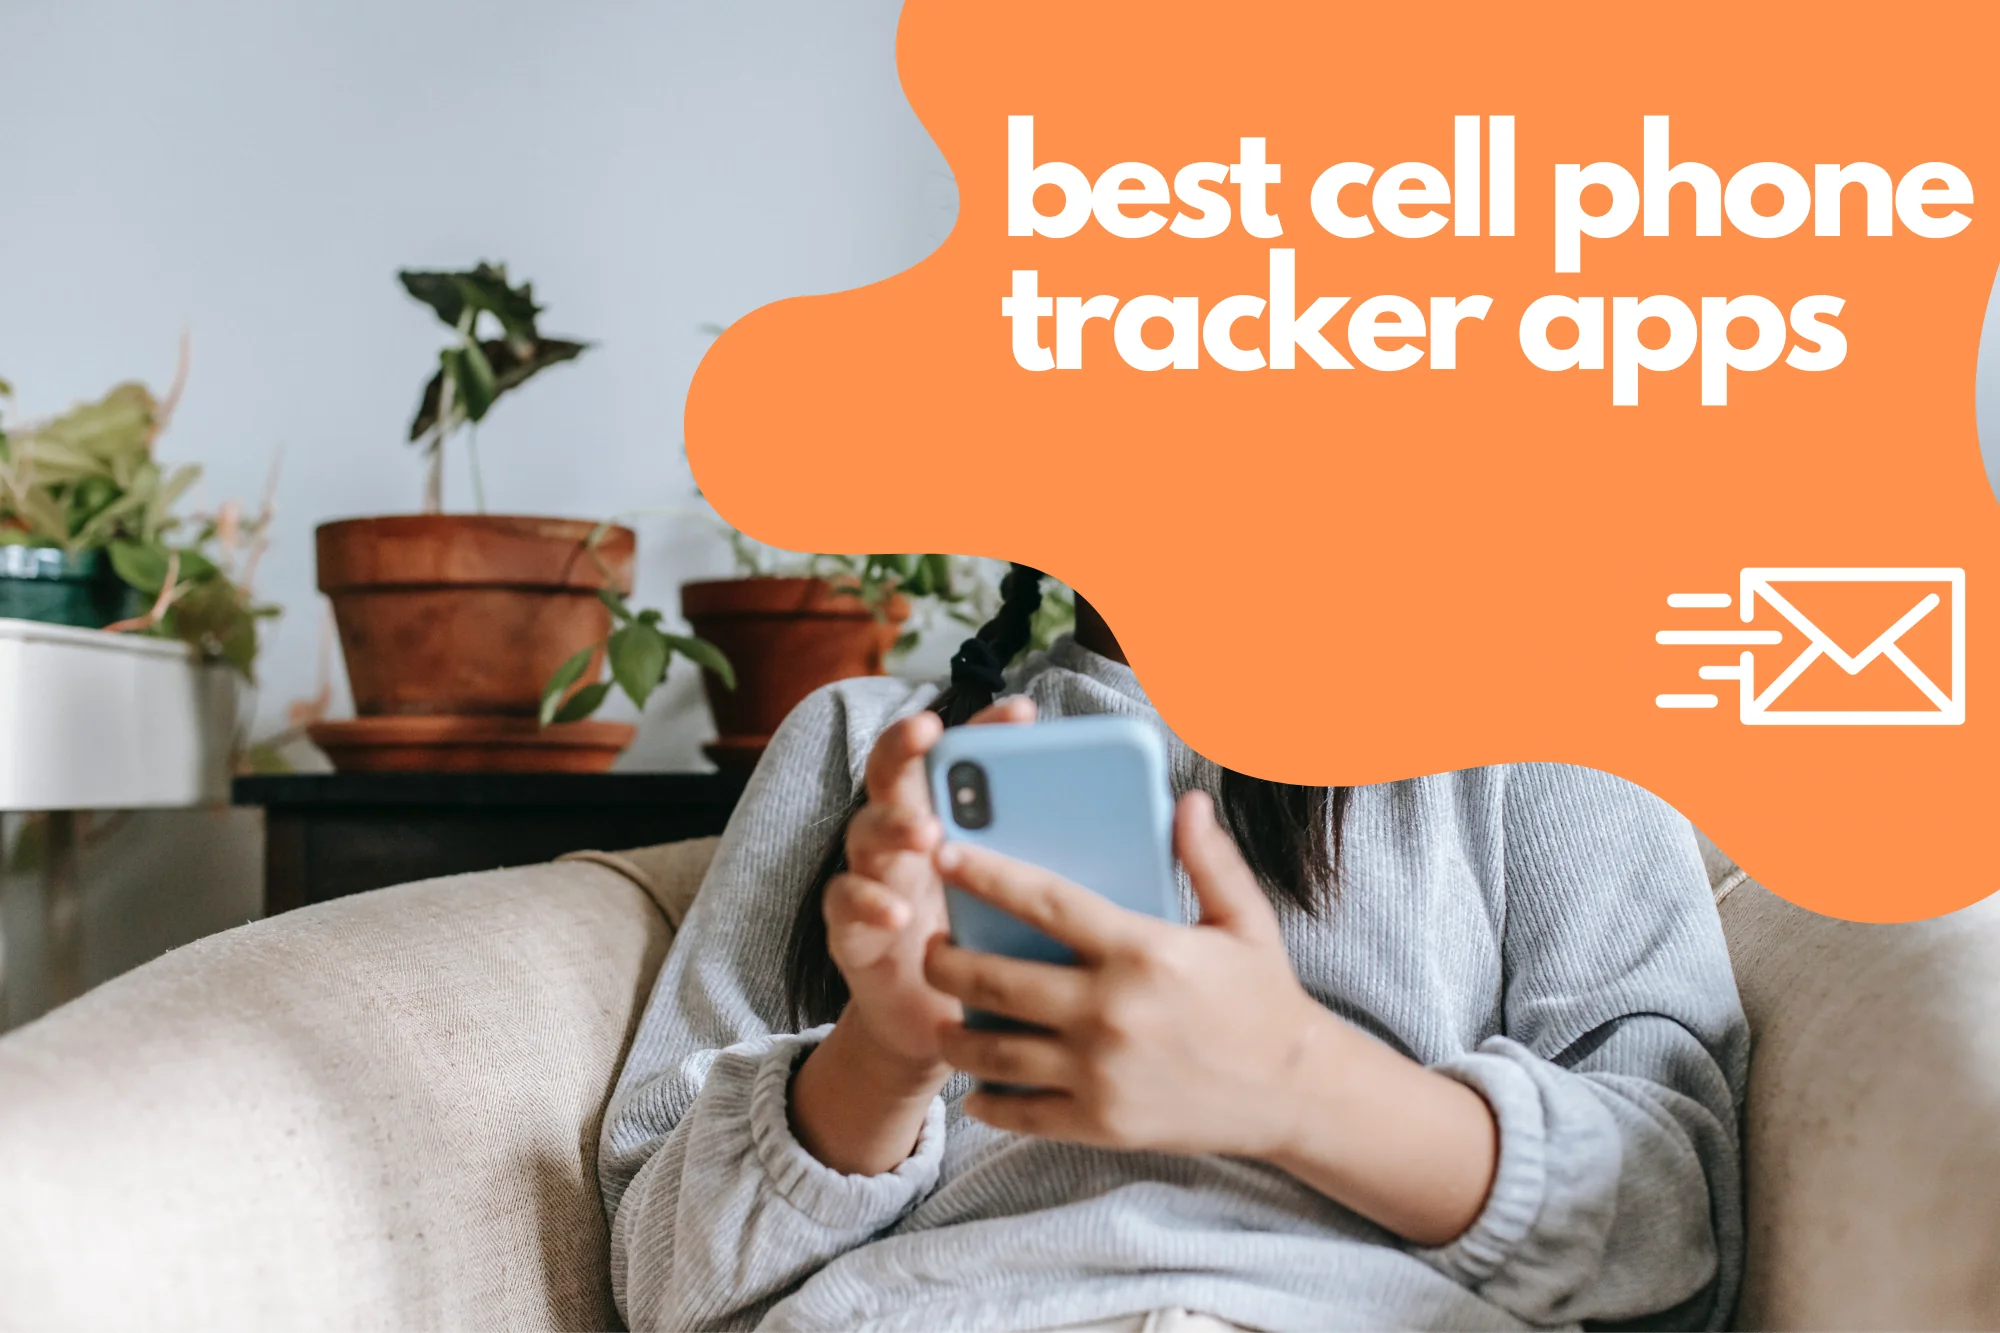 Can I track a cell phone with just a number?